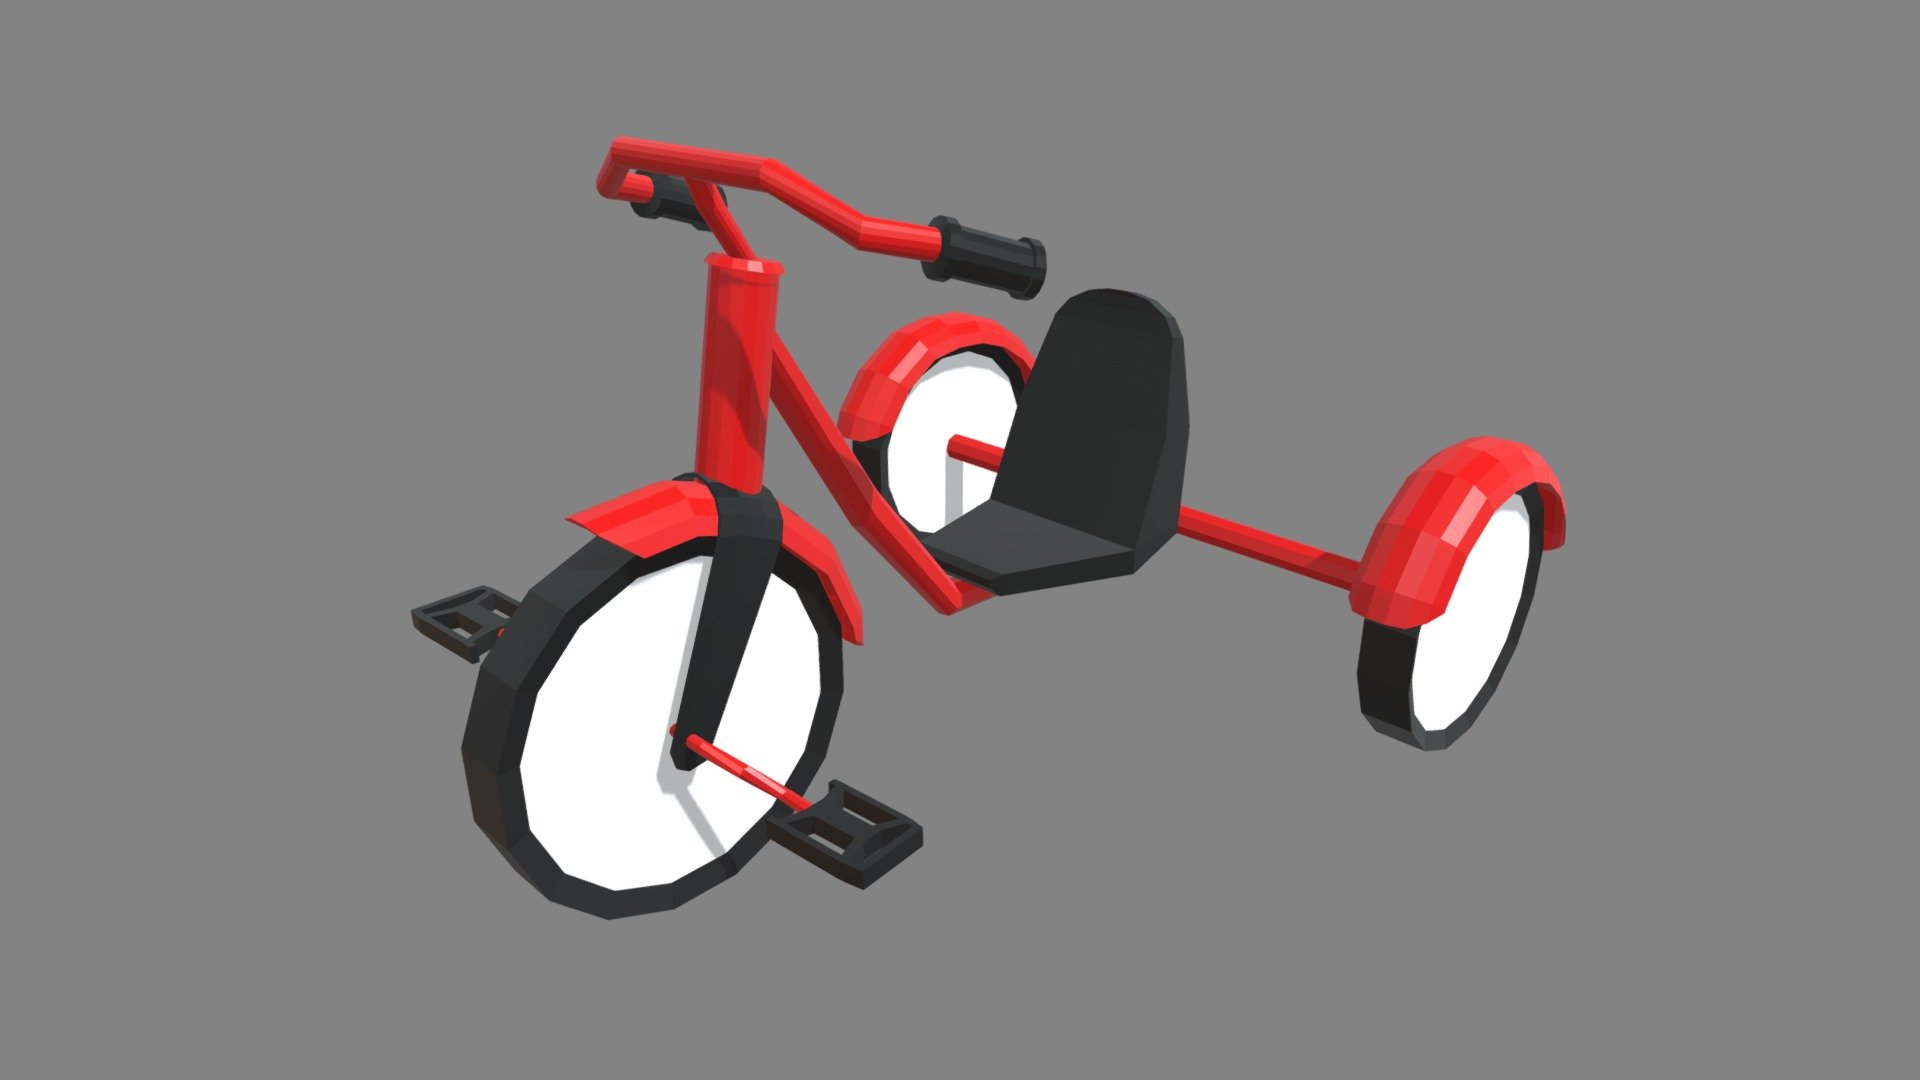 This model contains a Low Poly Tricycle based on a motorbike which i modeled in Maya 2018. This model is perfect to create a new great scene with different low poly cars or low poly items. I will add a low poly vehicle pack soon on my profile.

Tris: 2818 // Verts: 1427

The model is ready as one unique part and ready for being a great CGI model and also a 3D printable model, i will add the STL model, tested for 3D printing in Ultimaker Cura. I uploaded the model in .mb, ,blend, .stl, .obj and .fbx.

If you need any kind of help contact me, i will help you with everything i can. If you like the model please give me some feedback, I would appreciate it.

Don’t doubt on contacting me, i would be very happy to help. If you experience any kind of difficulties, be sure to contact me and i will help you. Sincerely Yours, ViperJr3D - Low Poly Tricycle - Buy Royalty Free 3D model by ViperJr3D 3d model